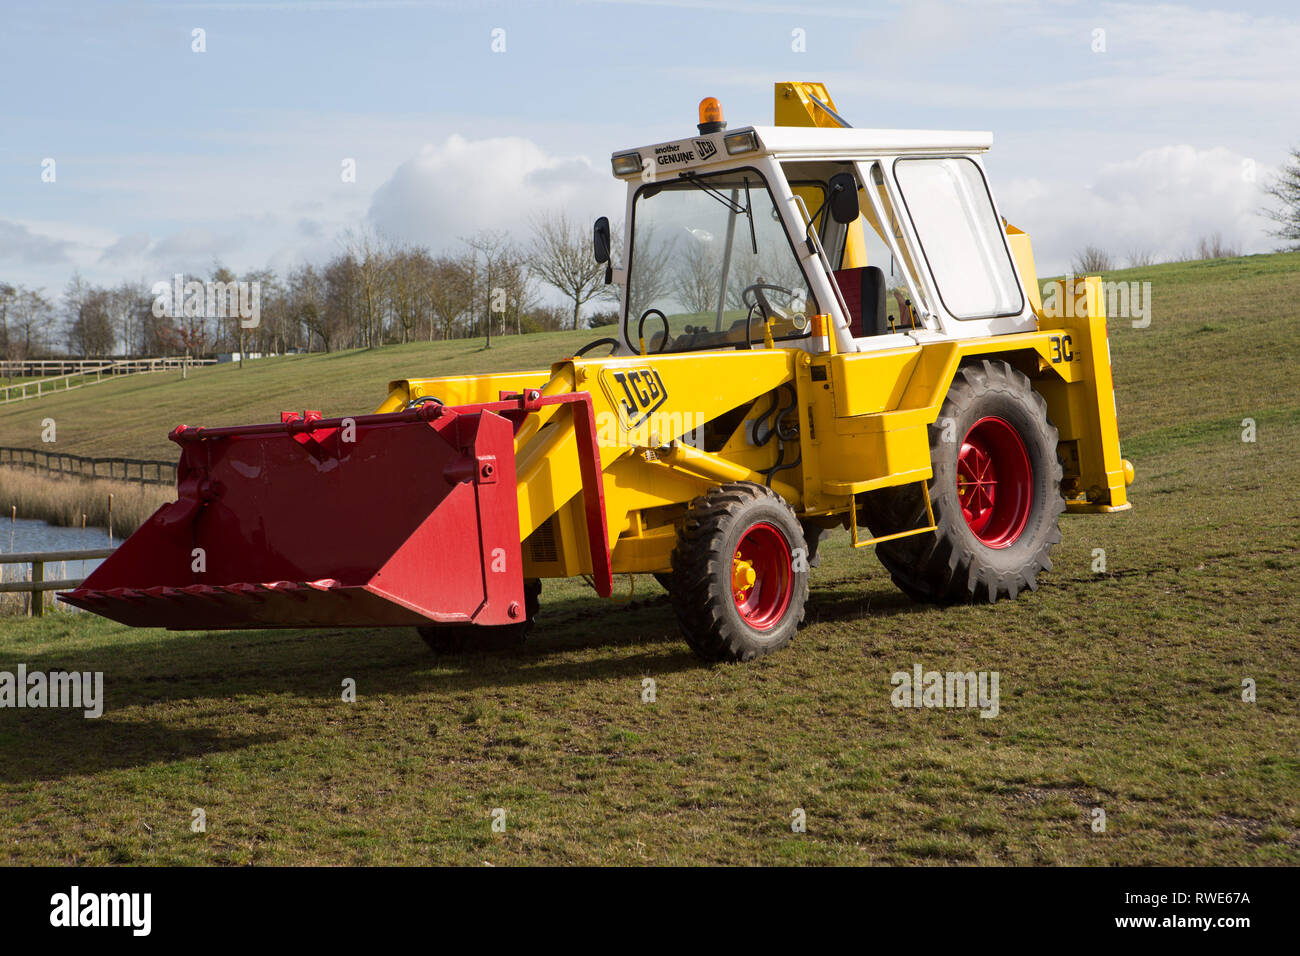 The model that made JCB great - The 3c backhoe loader - Still built at Rocester, Staffs UK Stock Photo